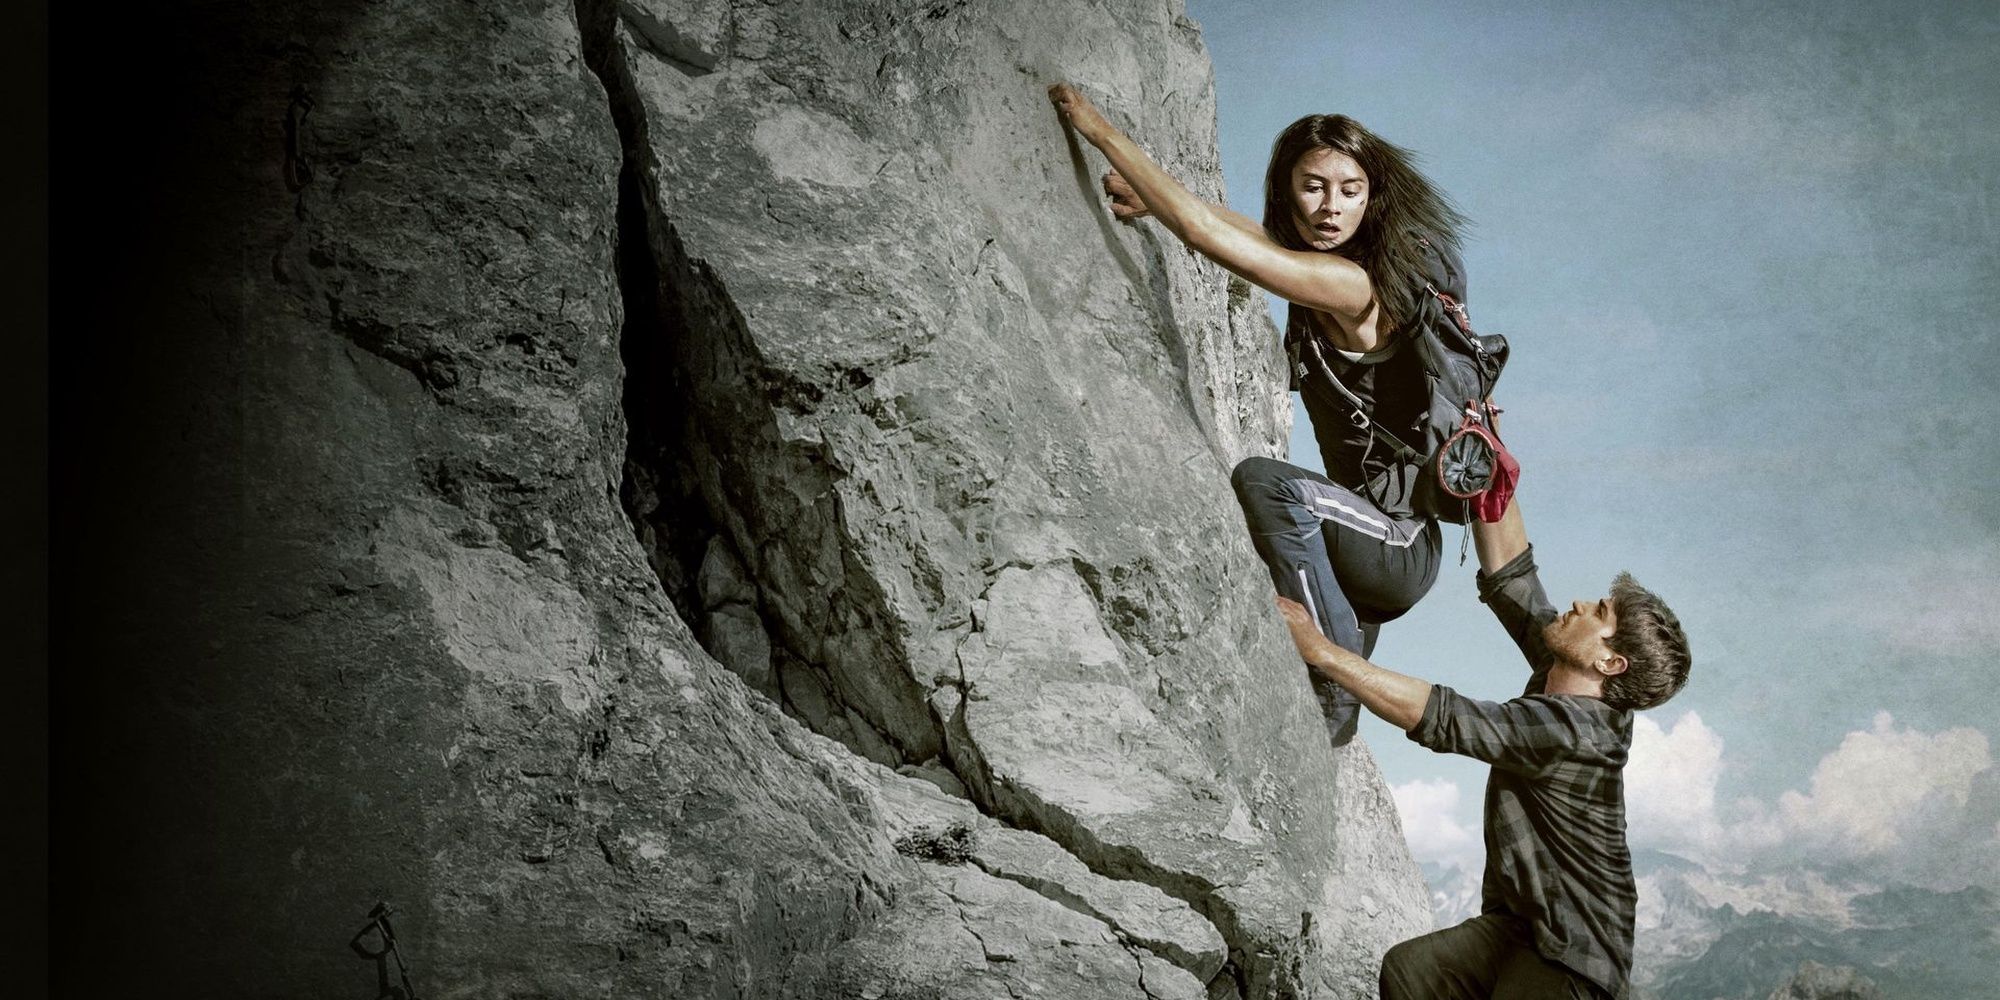 A woman climbing a mountain as a man tries to pull her off